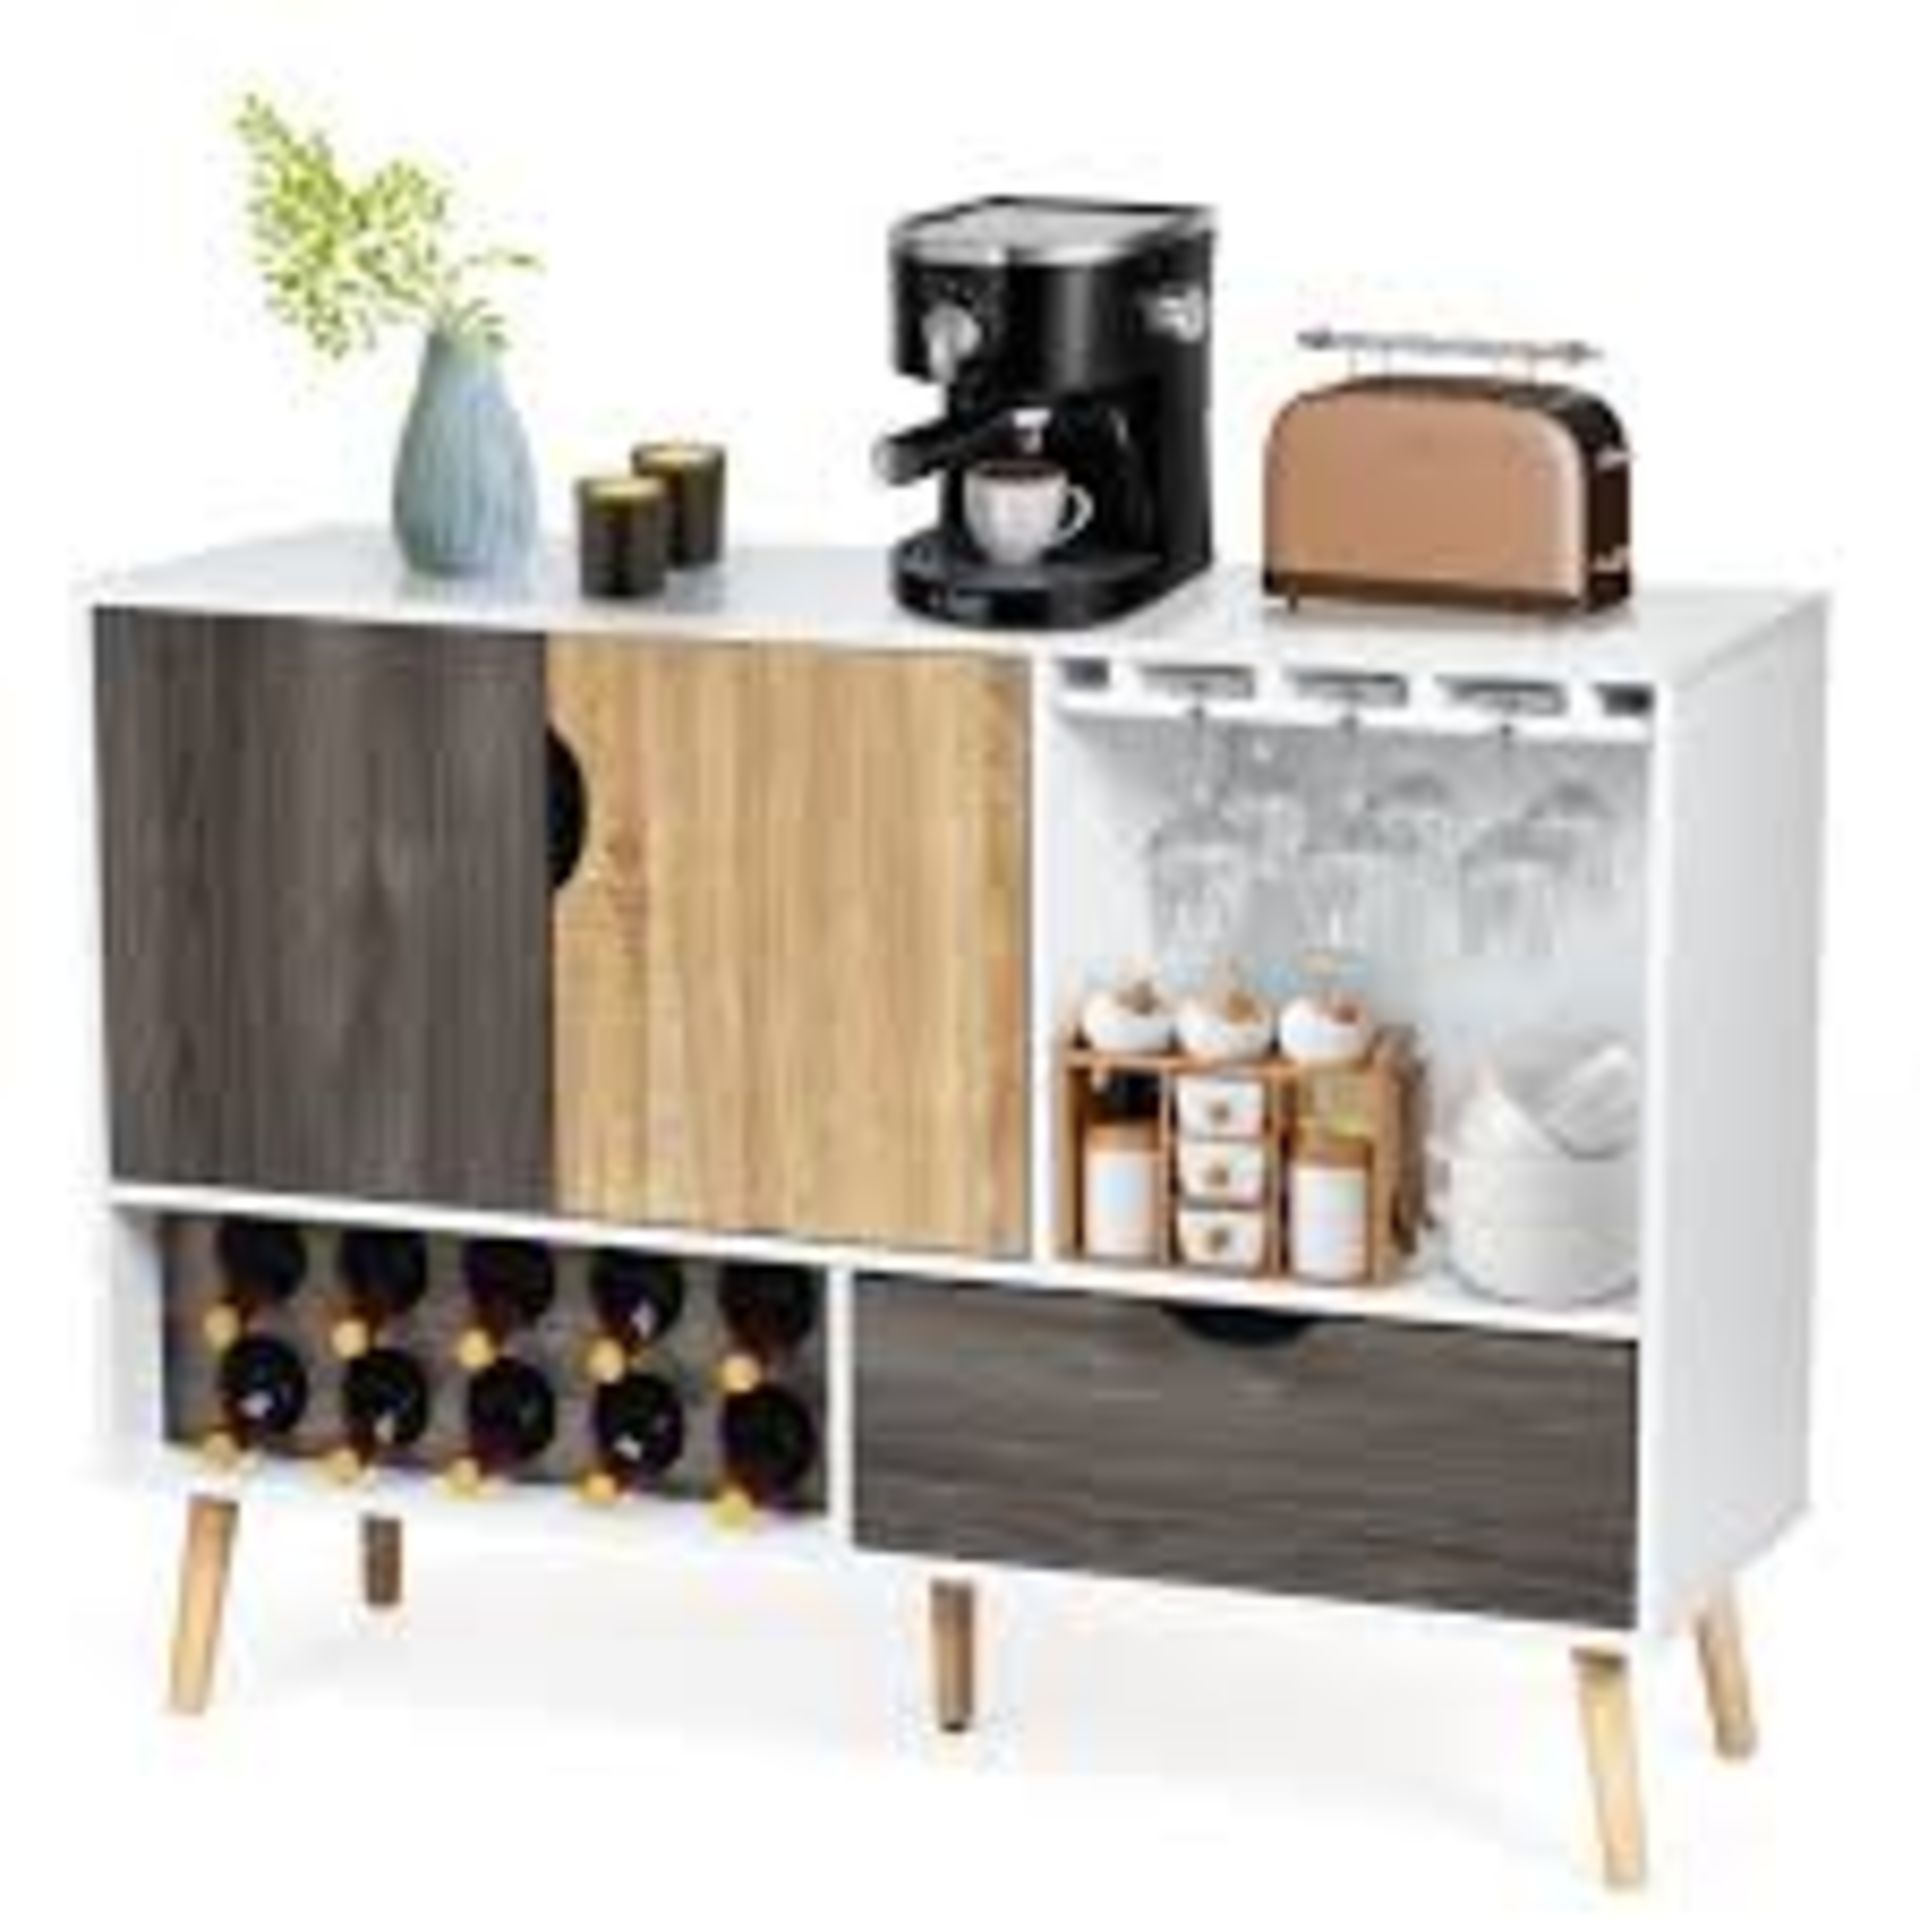 Modern Buffet Sideboard with Adjustable Shelf and 10 Wine Racks. - R14.10. This buffet sideboard